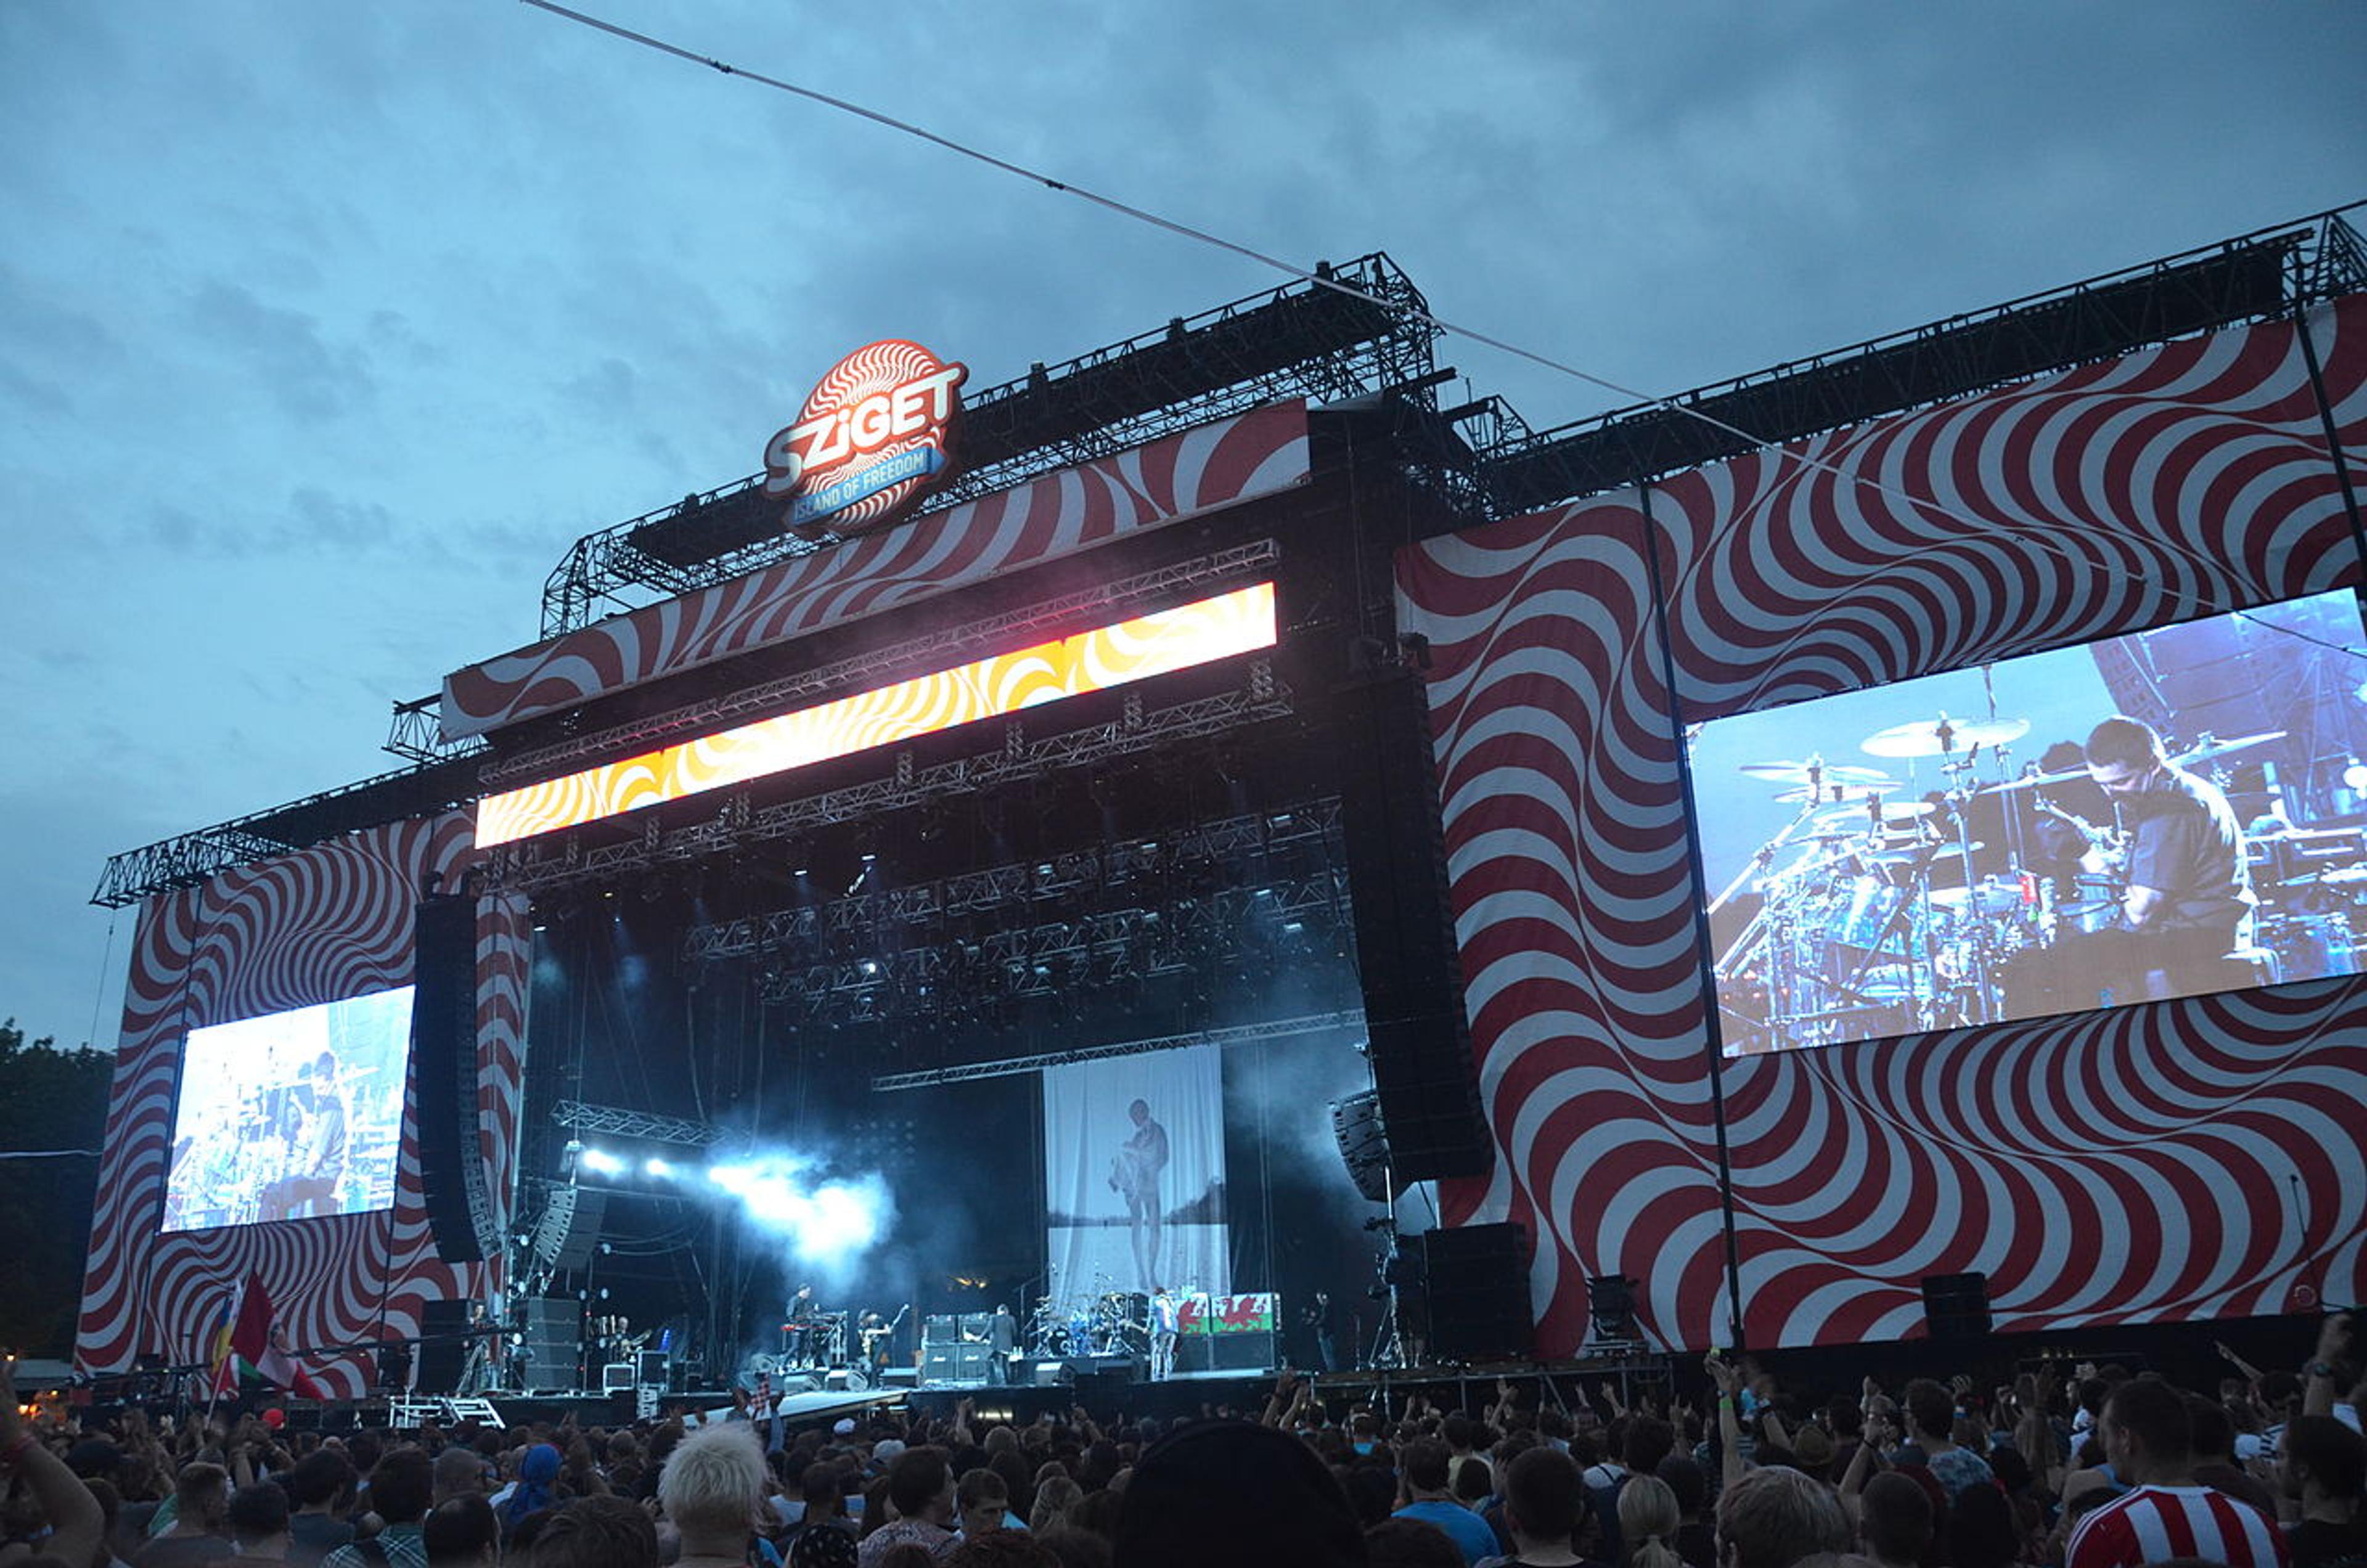 The stage of the Sziget festival in the early evening